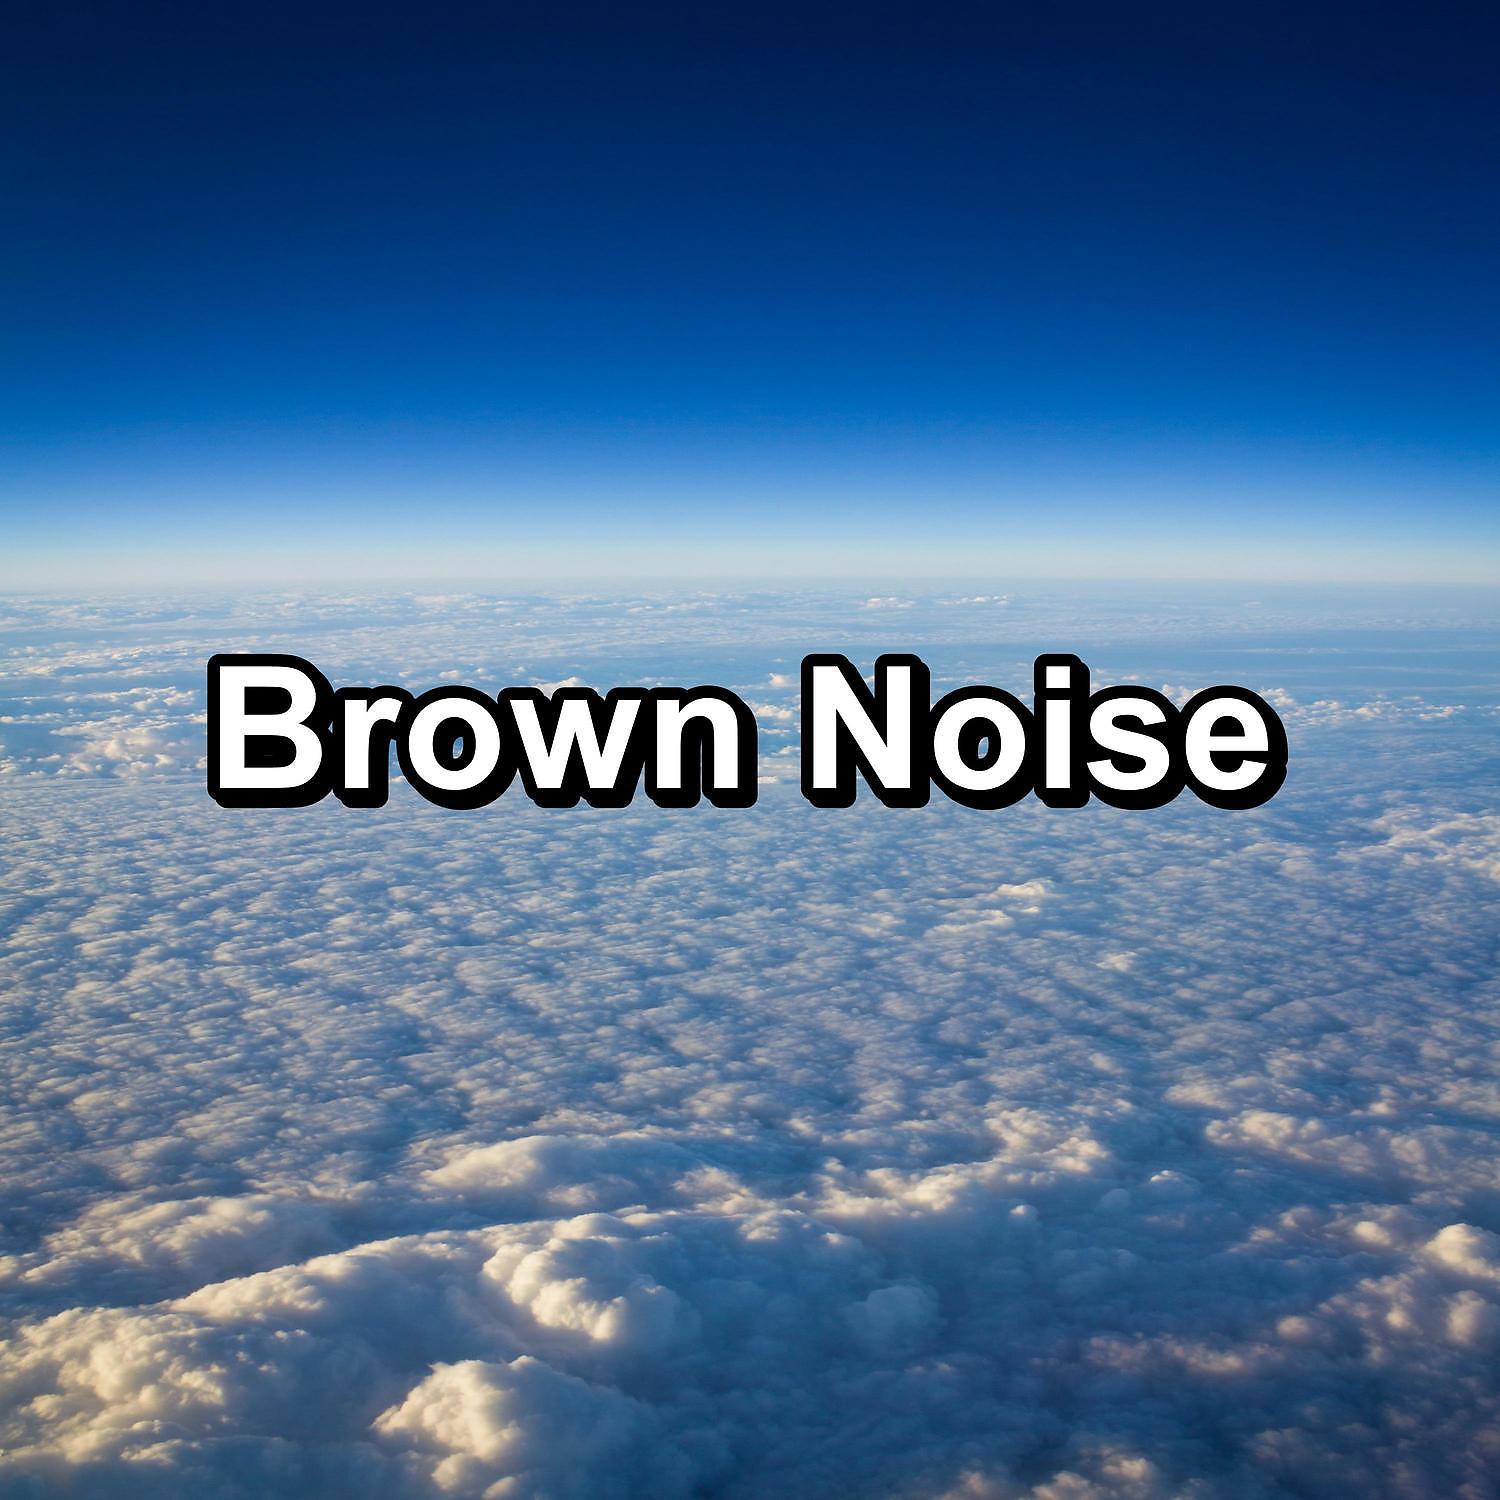 Brown Noise Sound, White Noise Sound, Pink Noise Sound - Medium Brown Noise Hair Dryer Loopable for 24 Hours